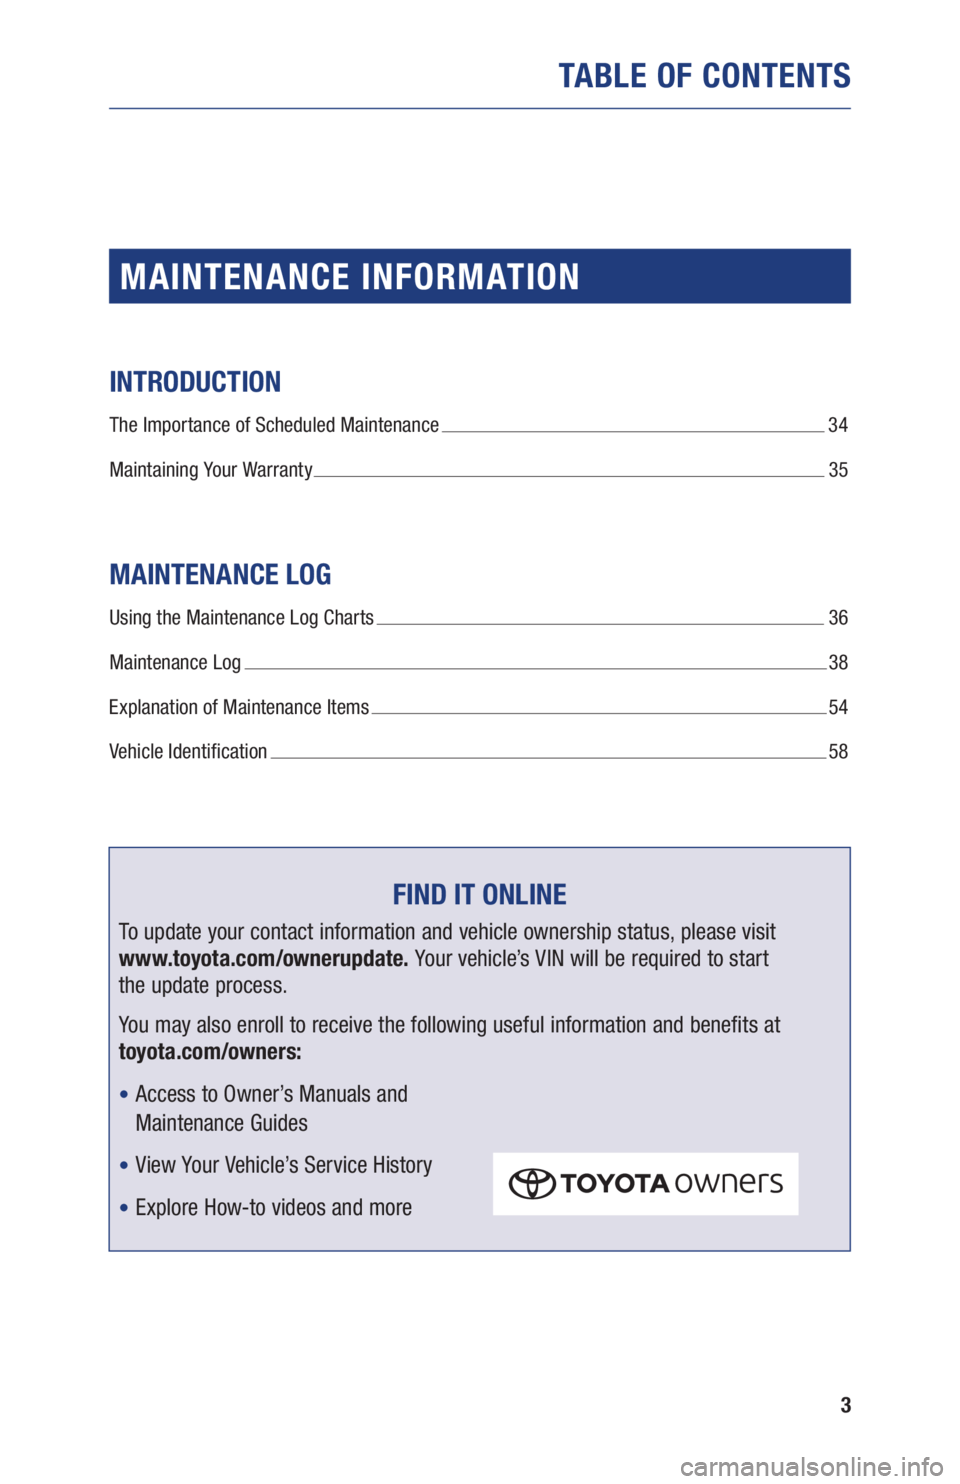 TOYOTA C-HR 2019  Warranties & Maintenance Guides (in English) 3
TABLE OF CONTENTS
MAINTENANCE INFORMATION
INTRODUCTION
The Importance of Scheduled Maintenance  34
Maintaining Your Warranty 
 35
MAINTENANCE LOG
Using the Maintenance Log Charts  36
Maintenance Log